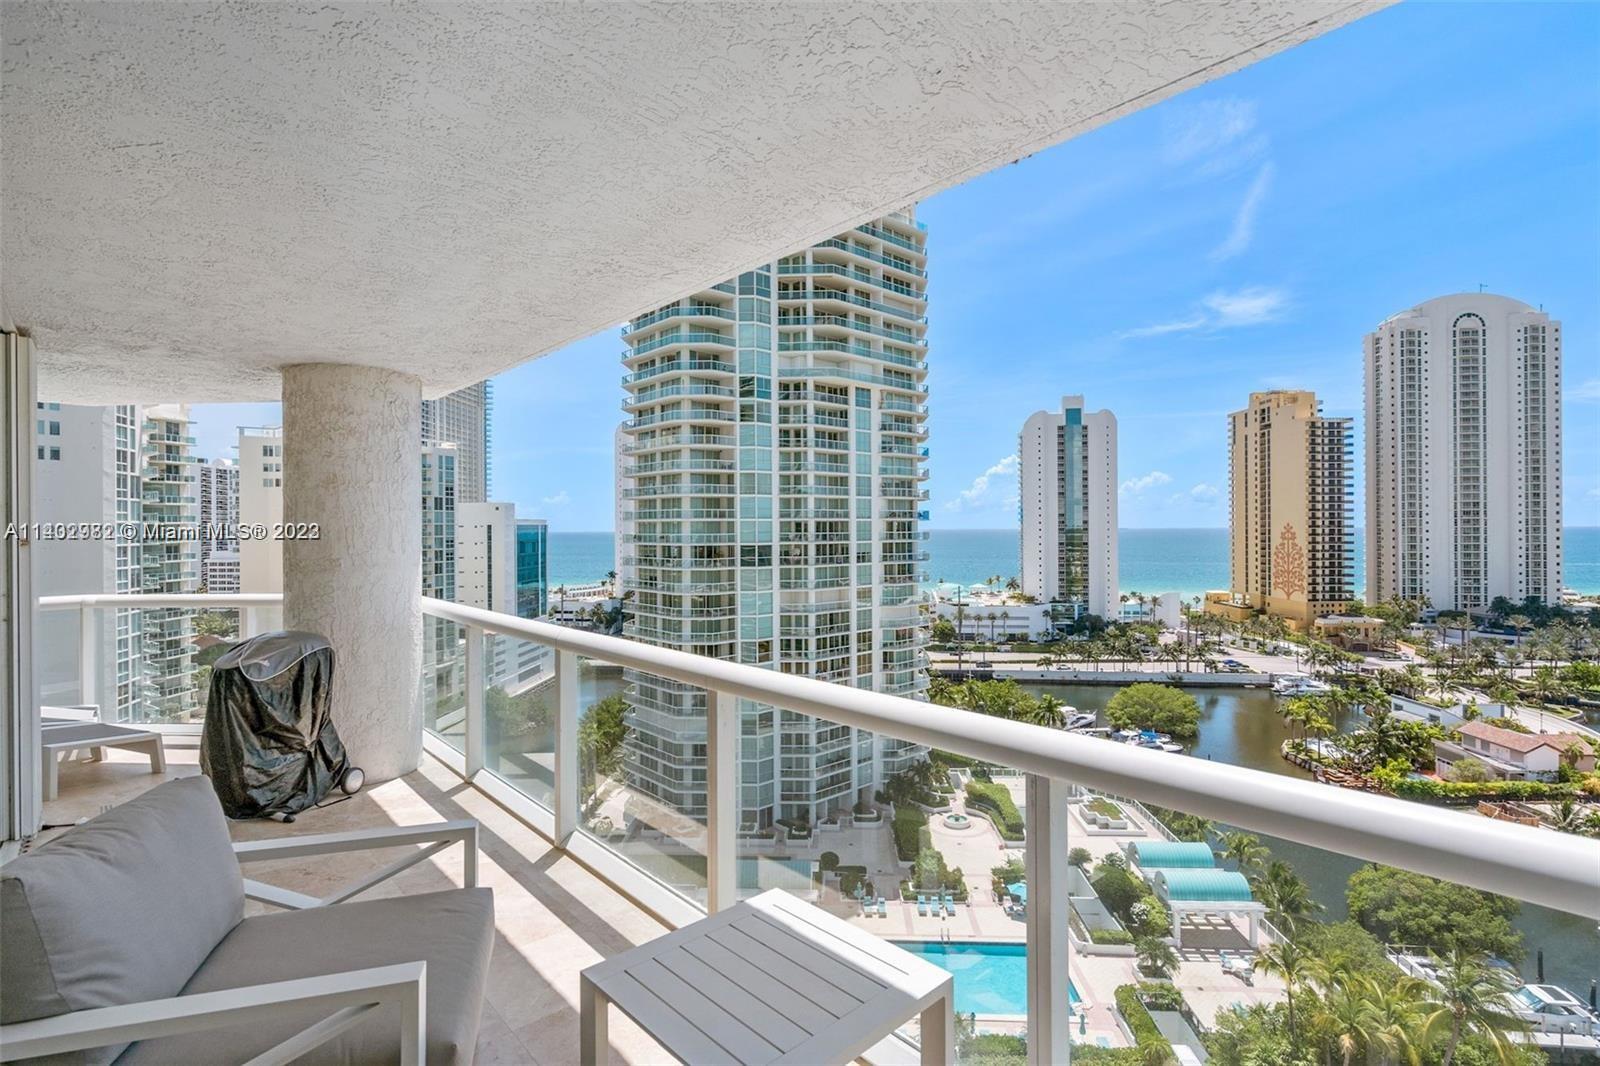 Amazing Unit looking brand new at Oceania V building. Most desirable layout of the building, 2 Bedroom/2 Baths split unit, and separated dining room area. Enjoy the breathtaking taking views from both, Ocean and Sunny Isles famous skyline. Marble floor in social areas, new carpet on bedrooms, Italian kitchen cabinets with kitchen Aid appliance. One parking space covered comes with the deed. The Oceania condo counts with two pools, a racquetball court. Tennis court ,beach services .Complex has a marina and beach access with a 5 star Hotel services and much more... Easy to show it won't last.